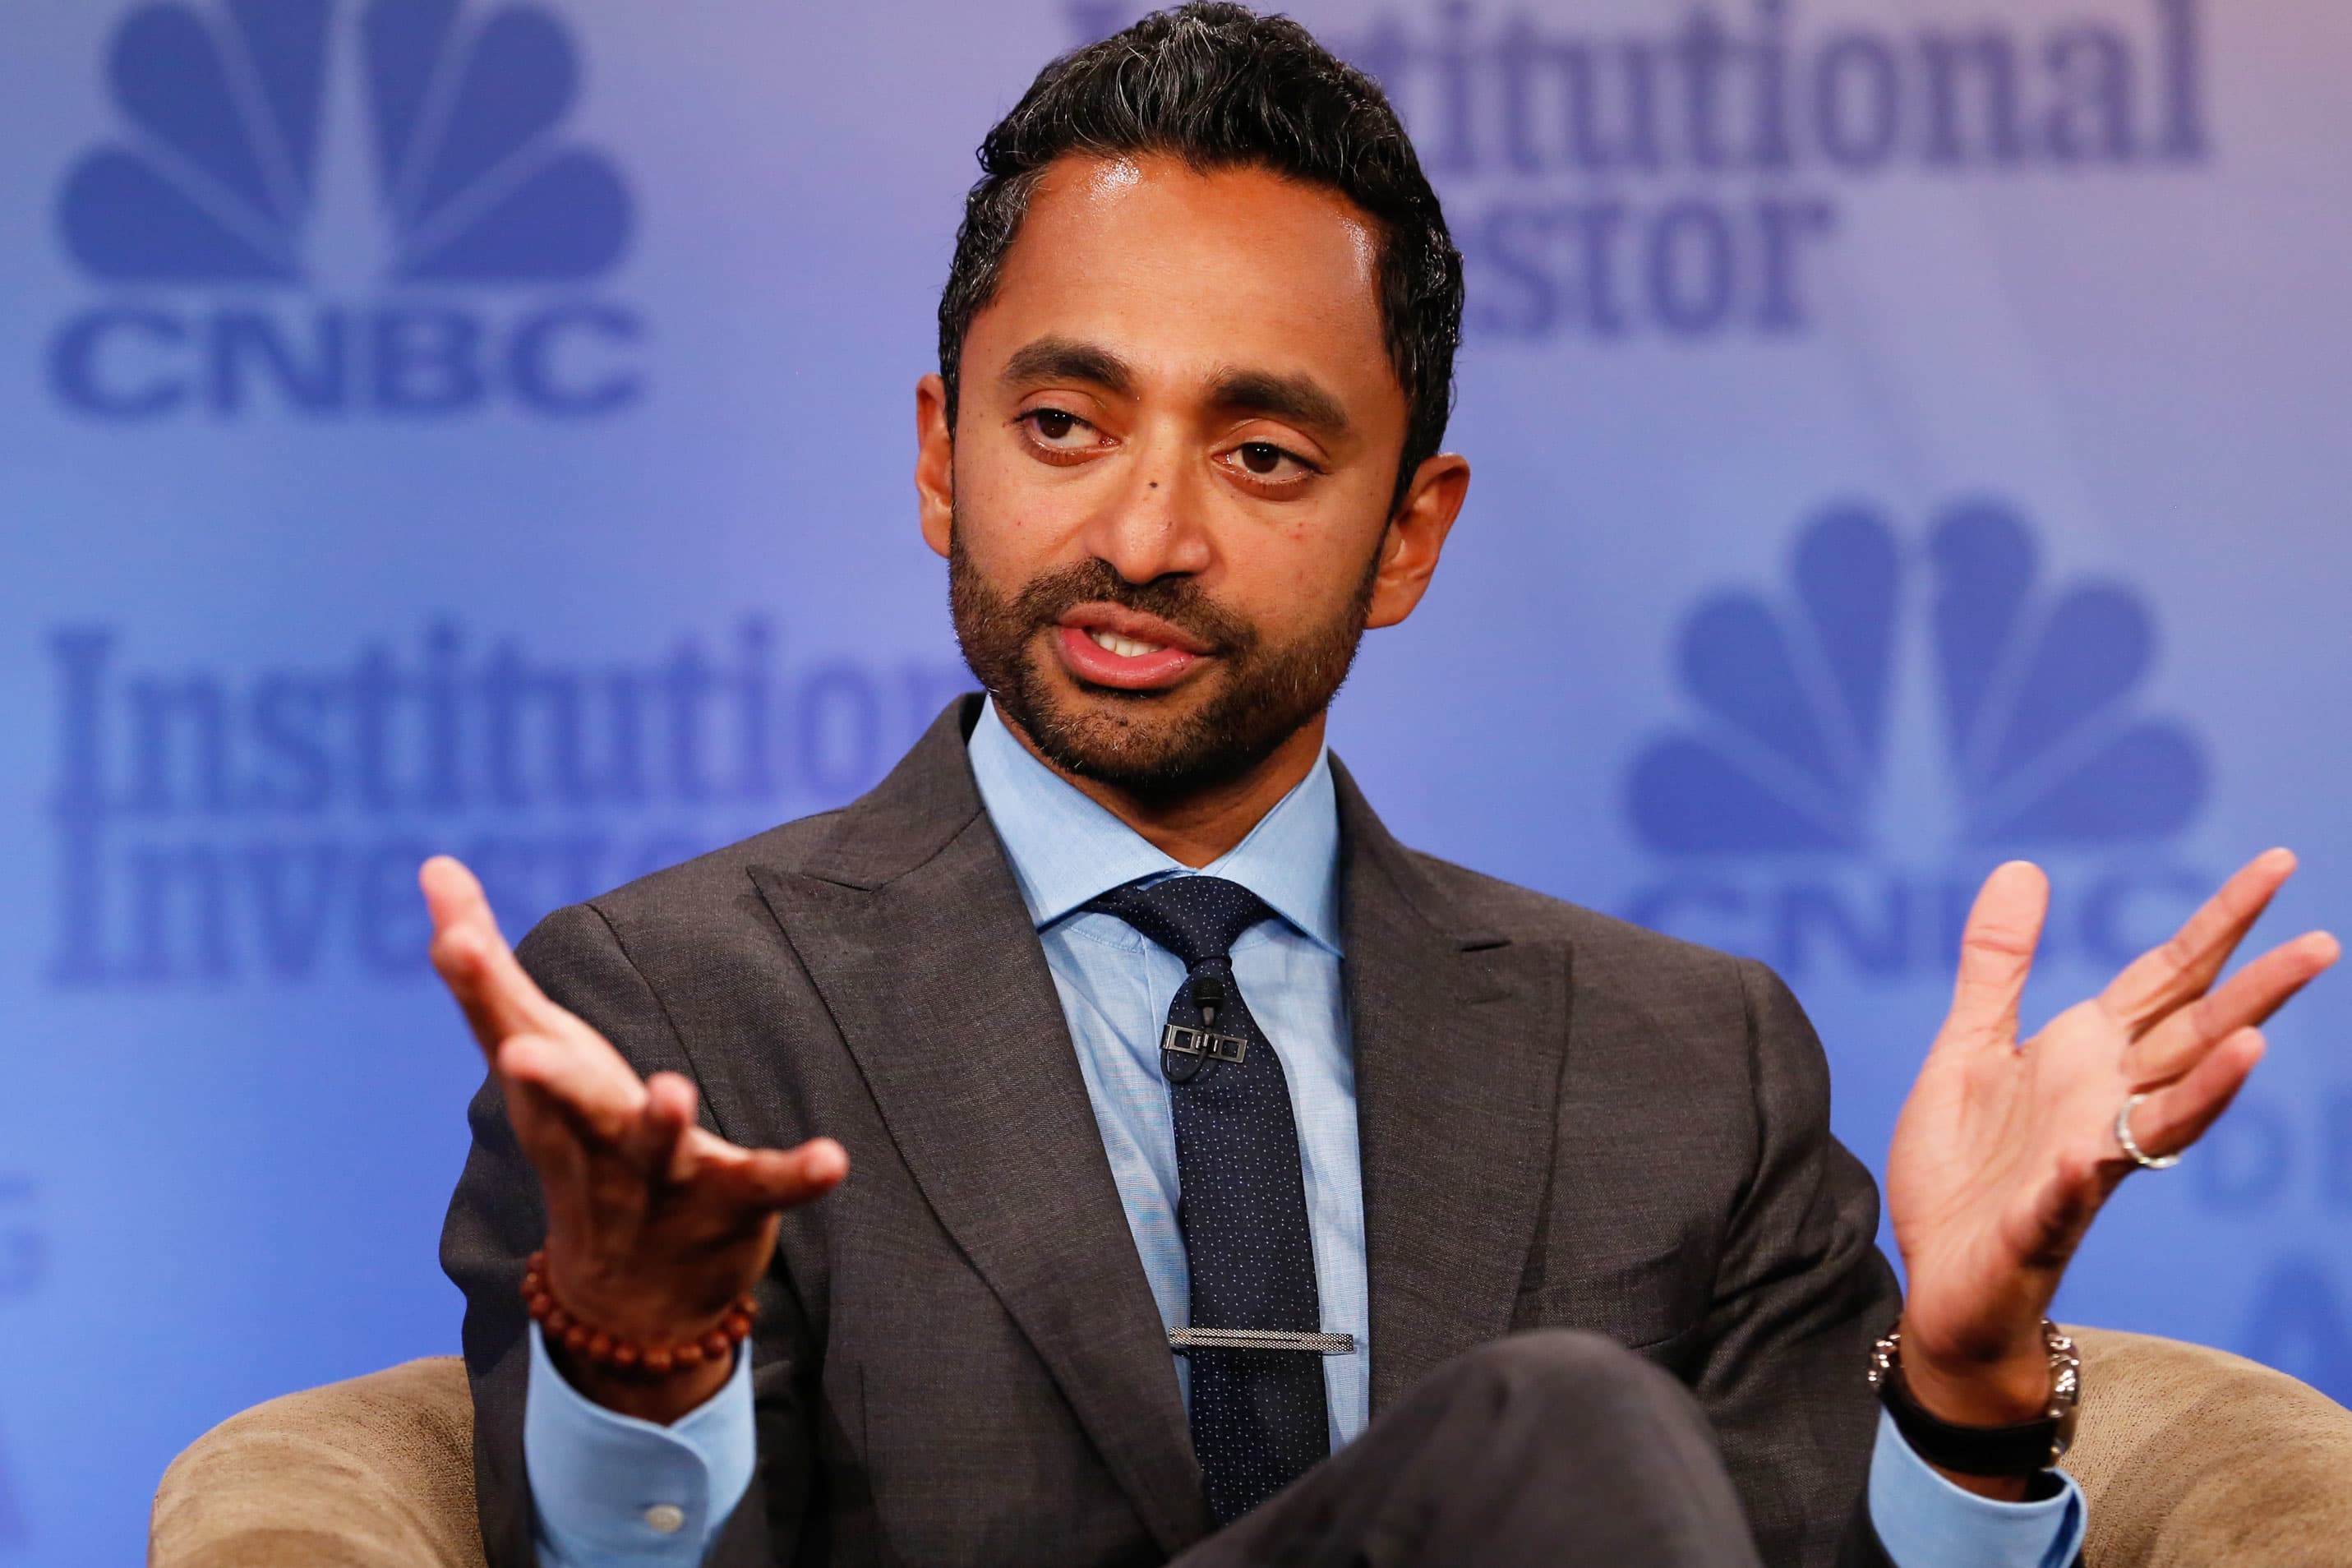 Chamath Palihapitiya closes GameStop’s position, but defends investors’ right to influence stocks like professionals